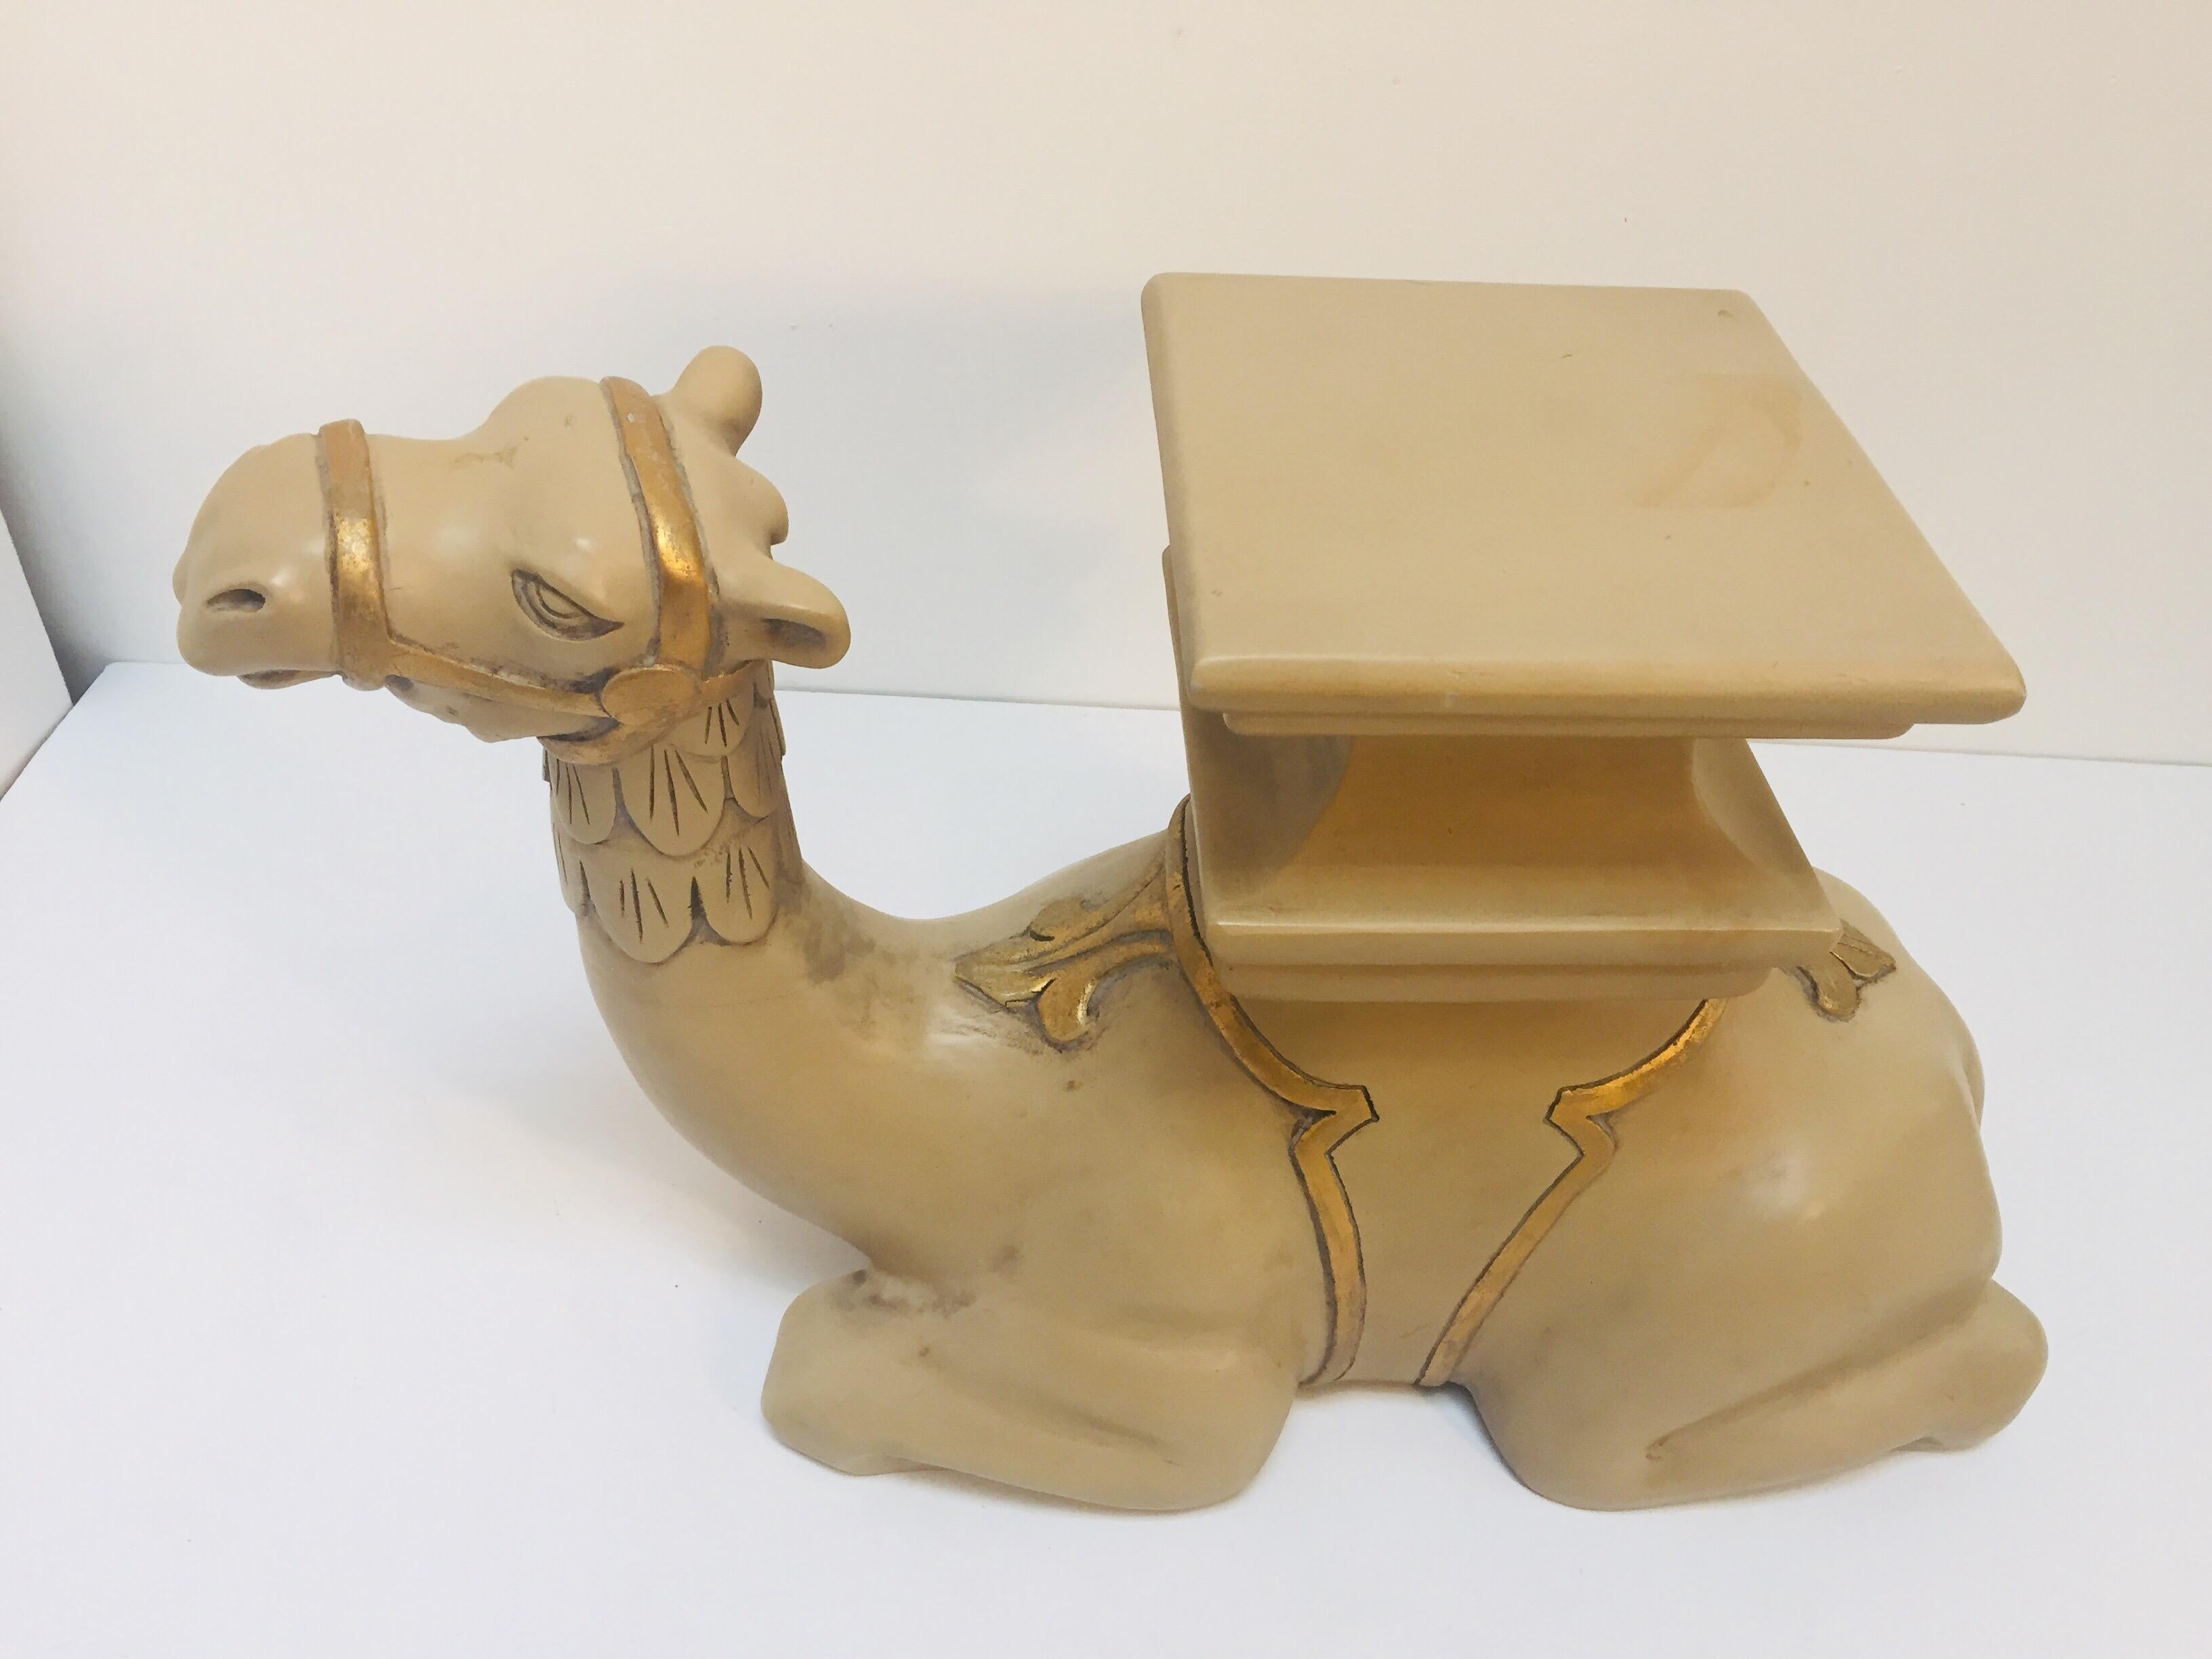 Pair of Camel Sculptures Stools or Side Tables 10